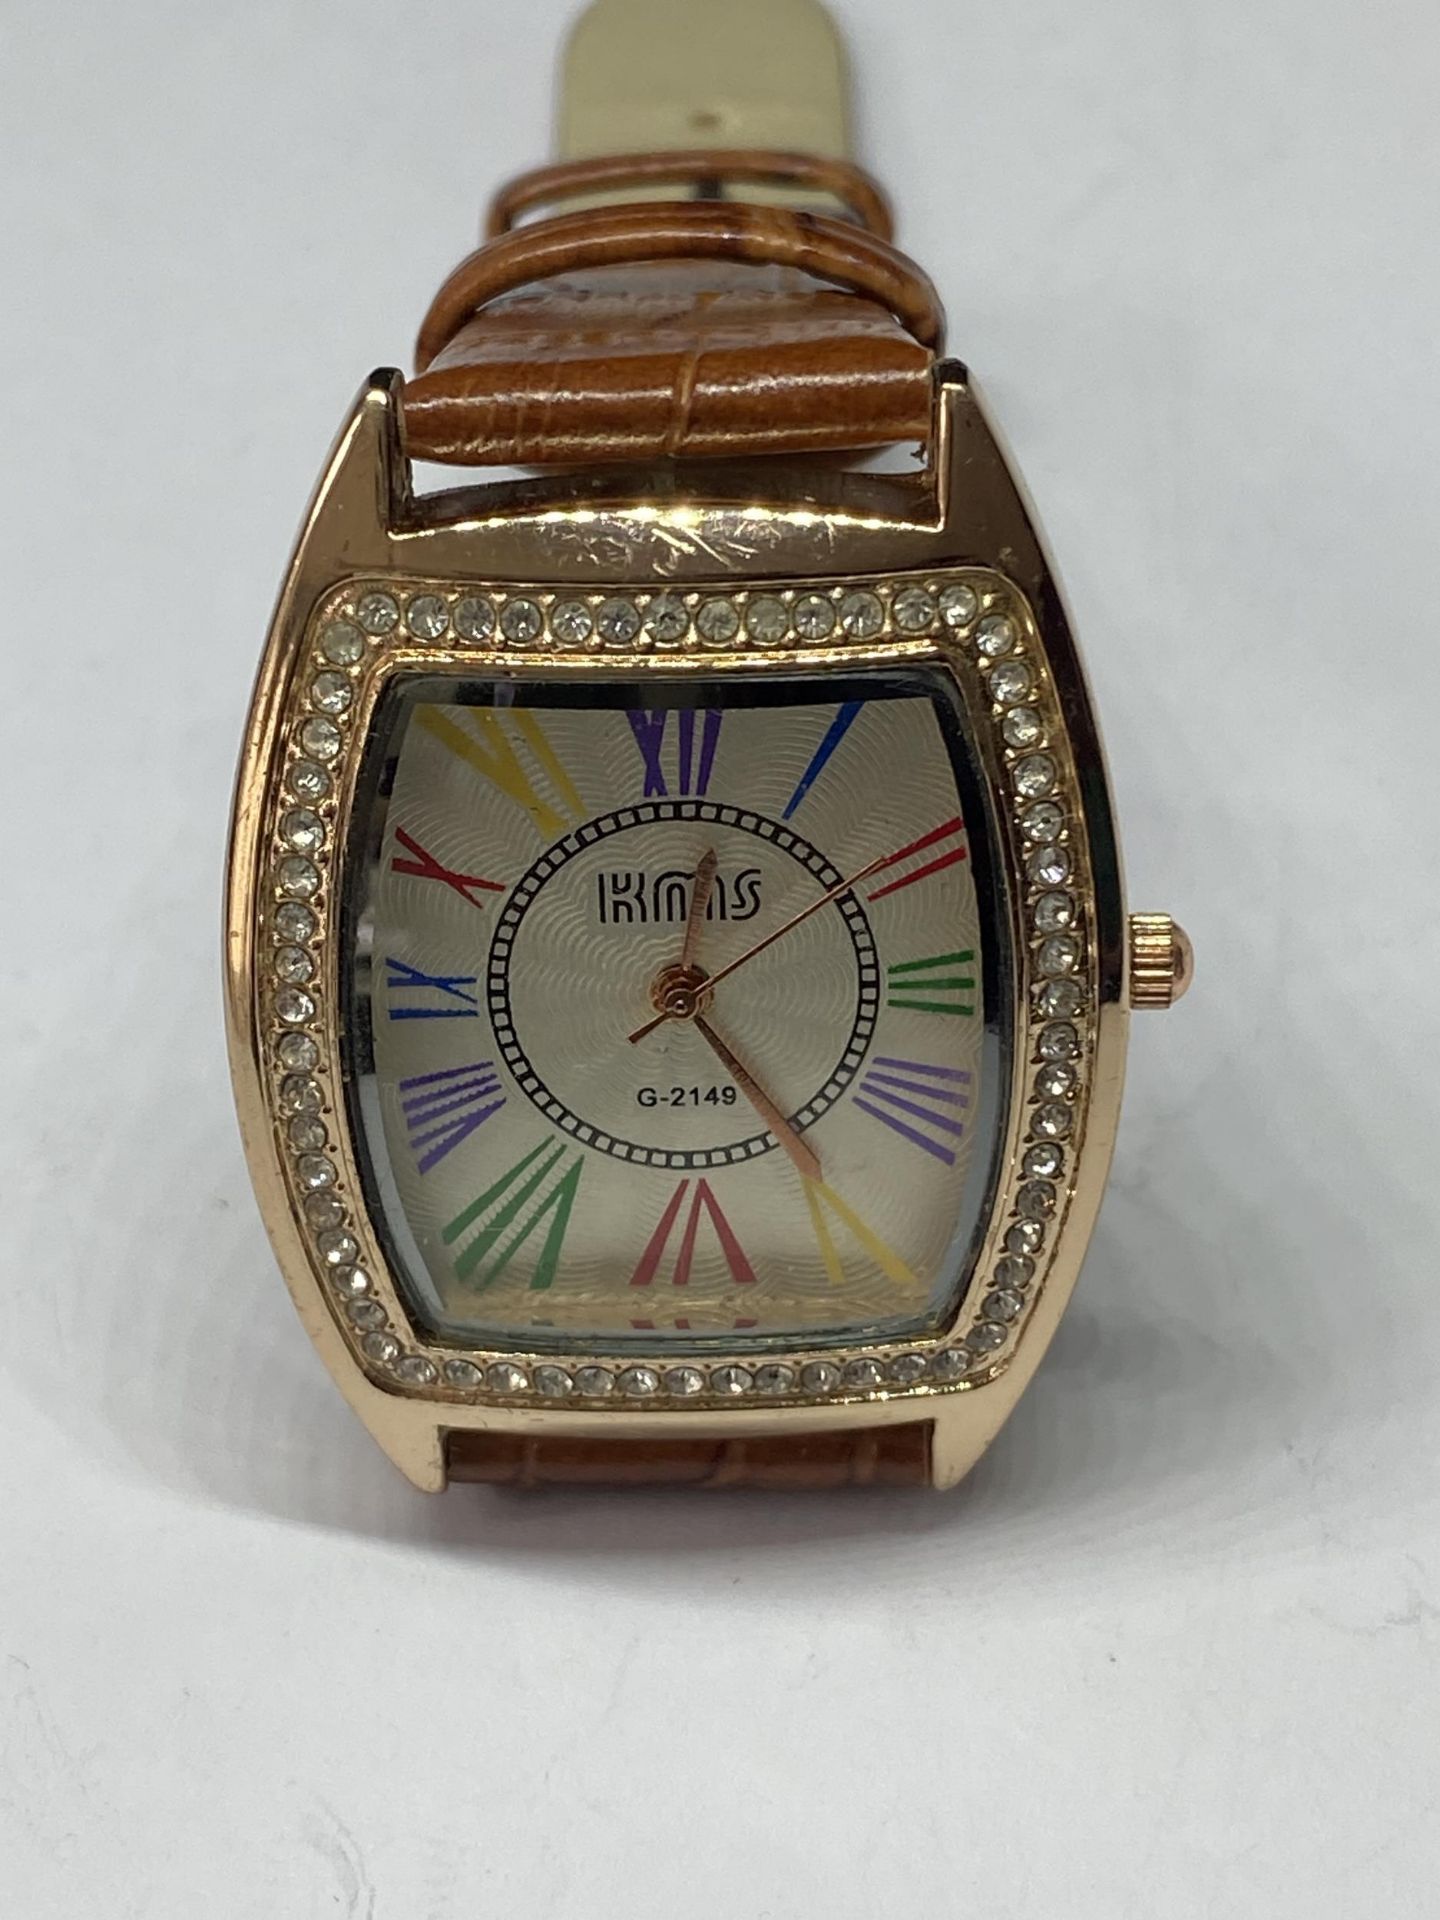 A WRIST WATCH SEEN IN WORKING ORDER BUT NO WARRANTY - Image 3 of 3